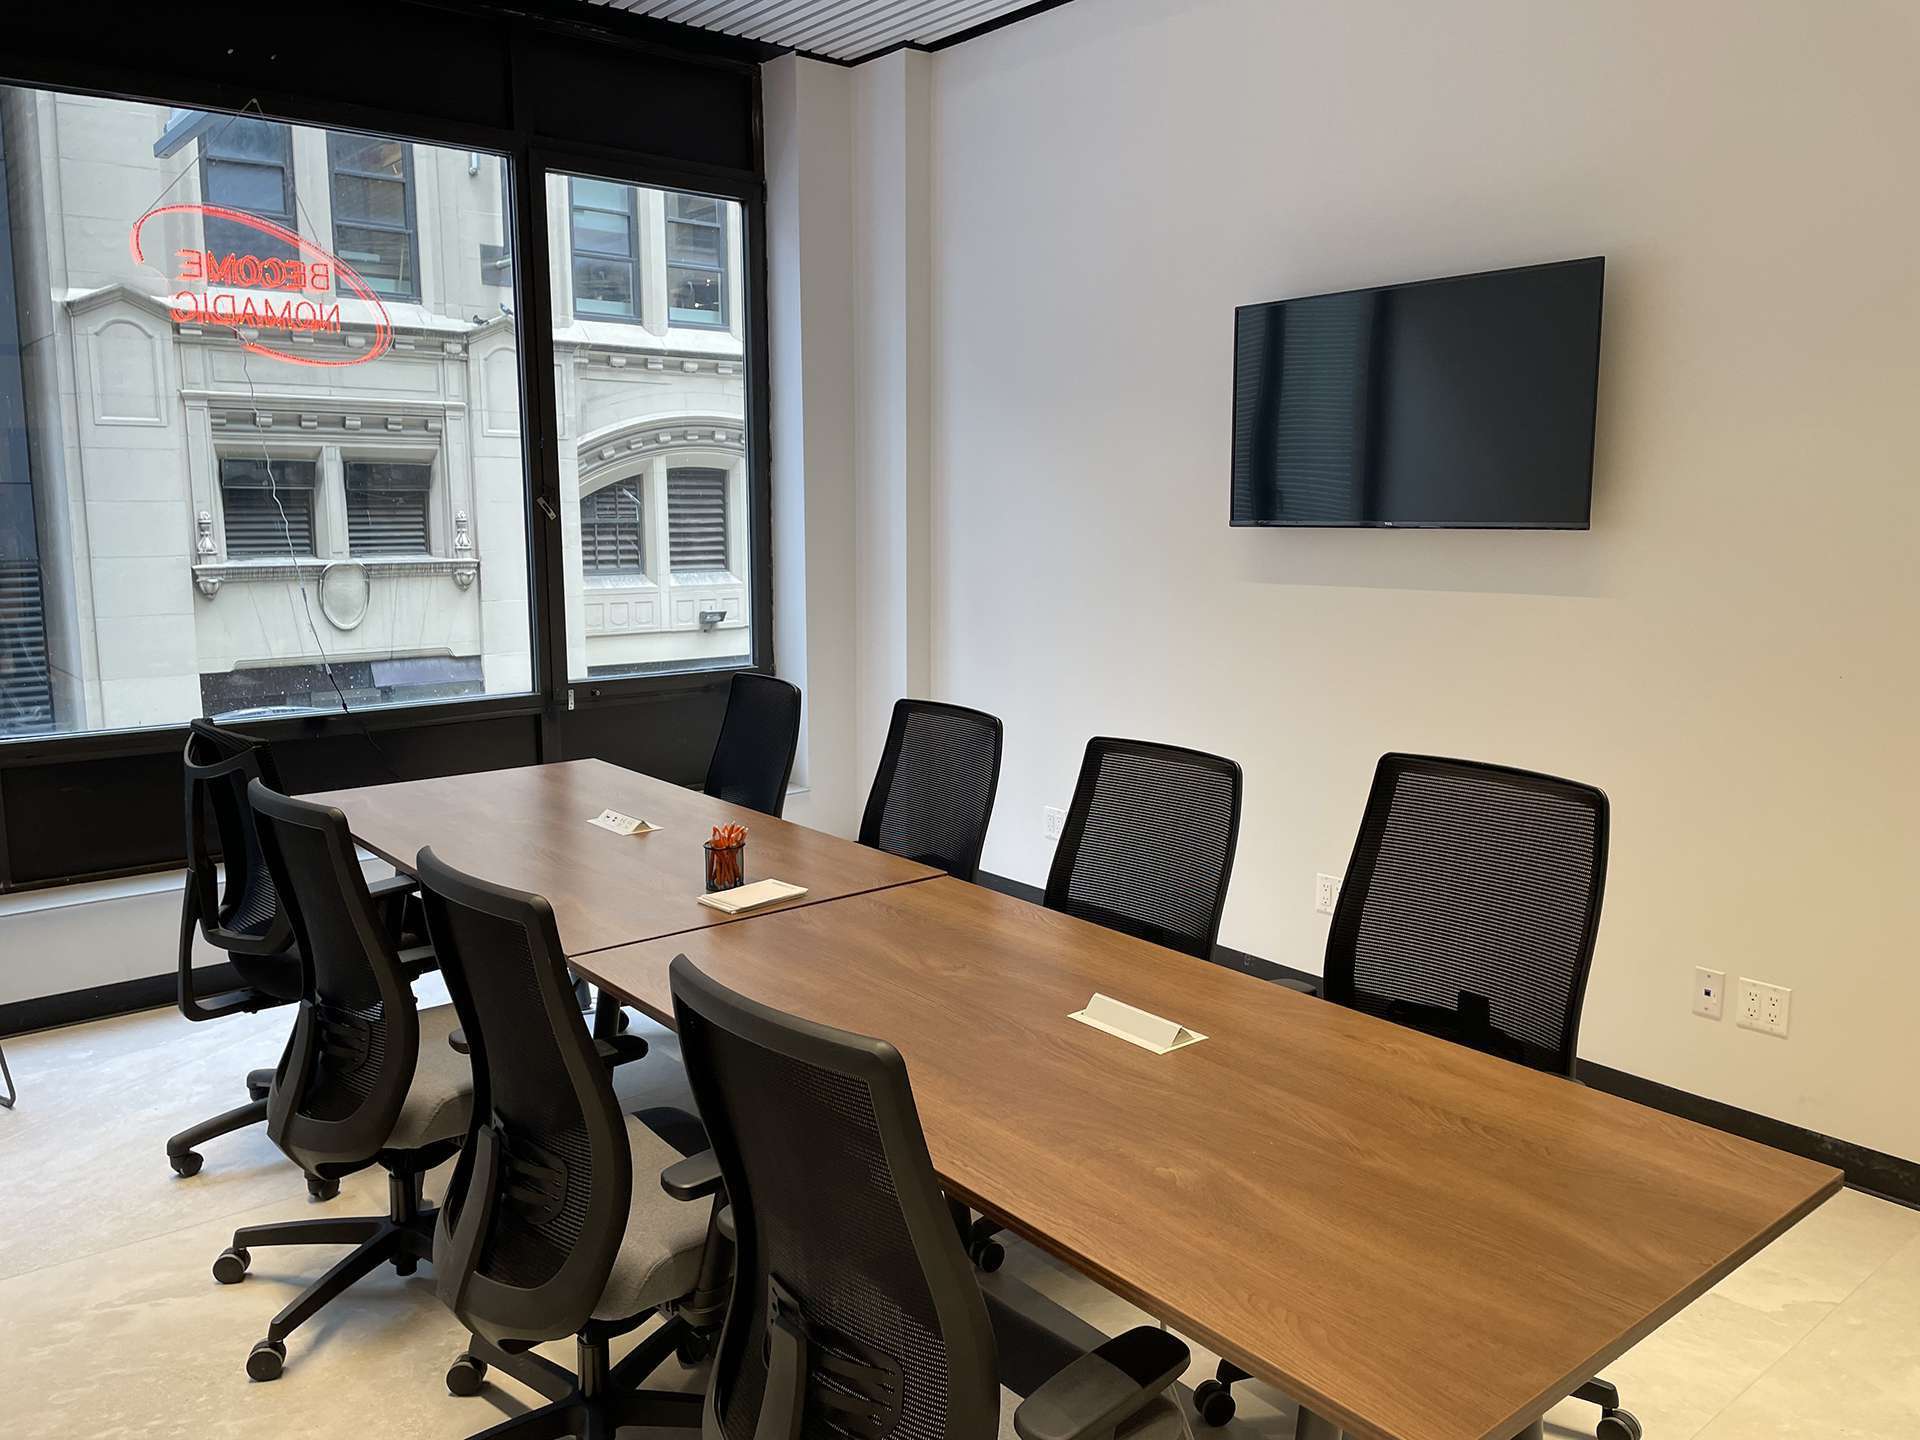 Modern meeting room designed to enhance productivity and communication.